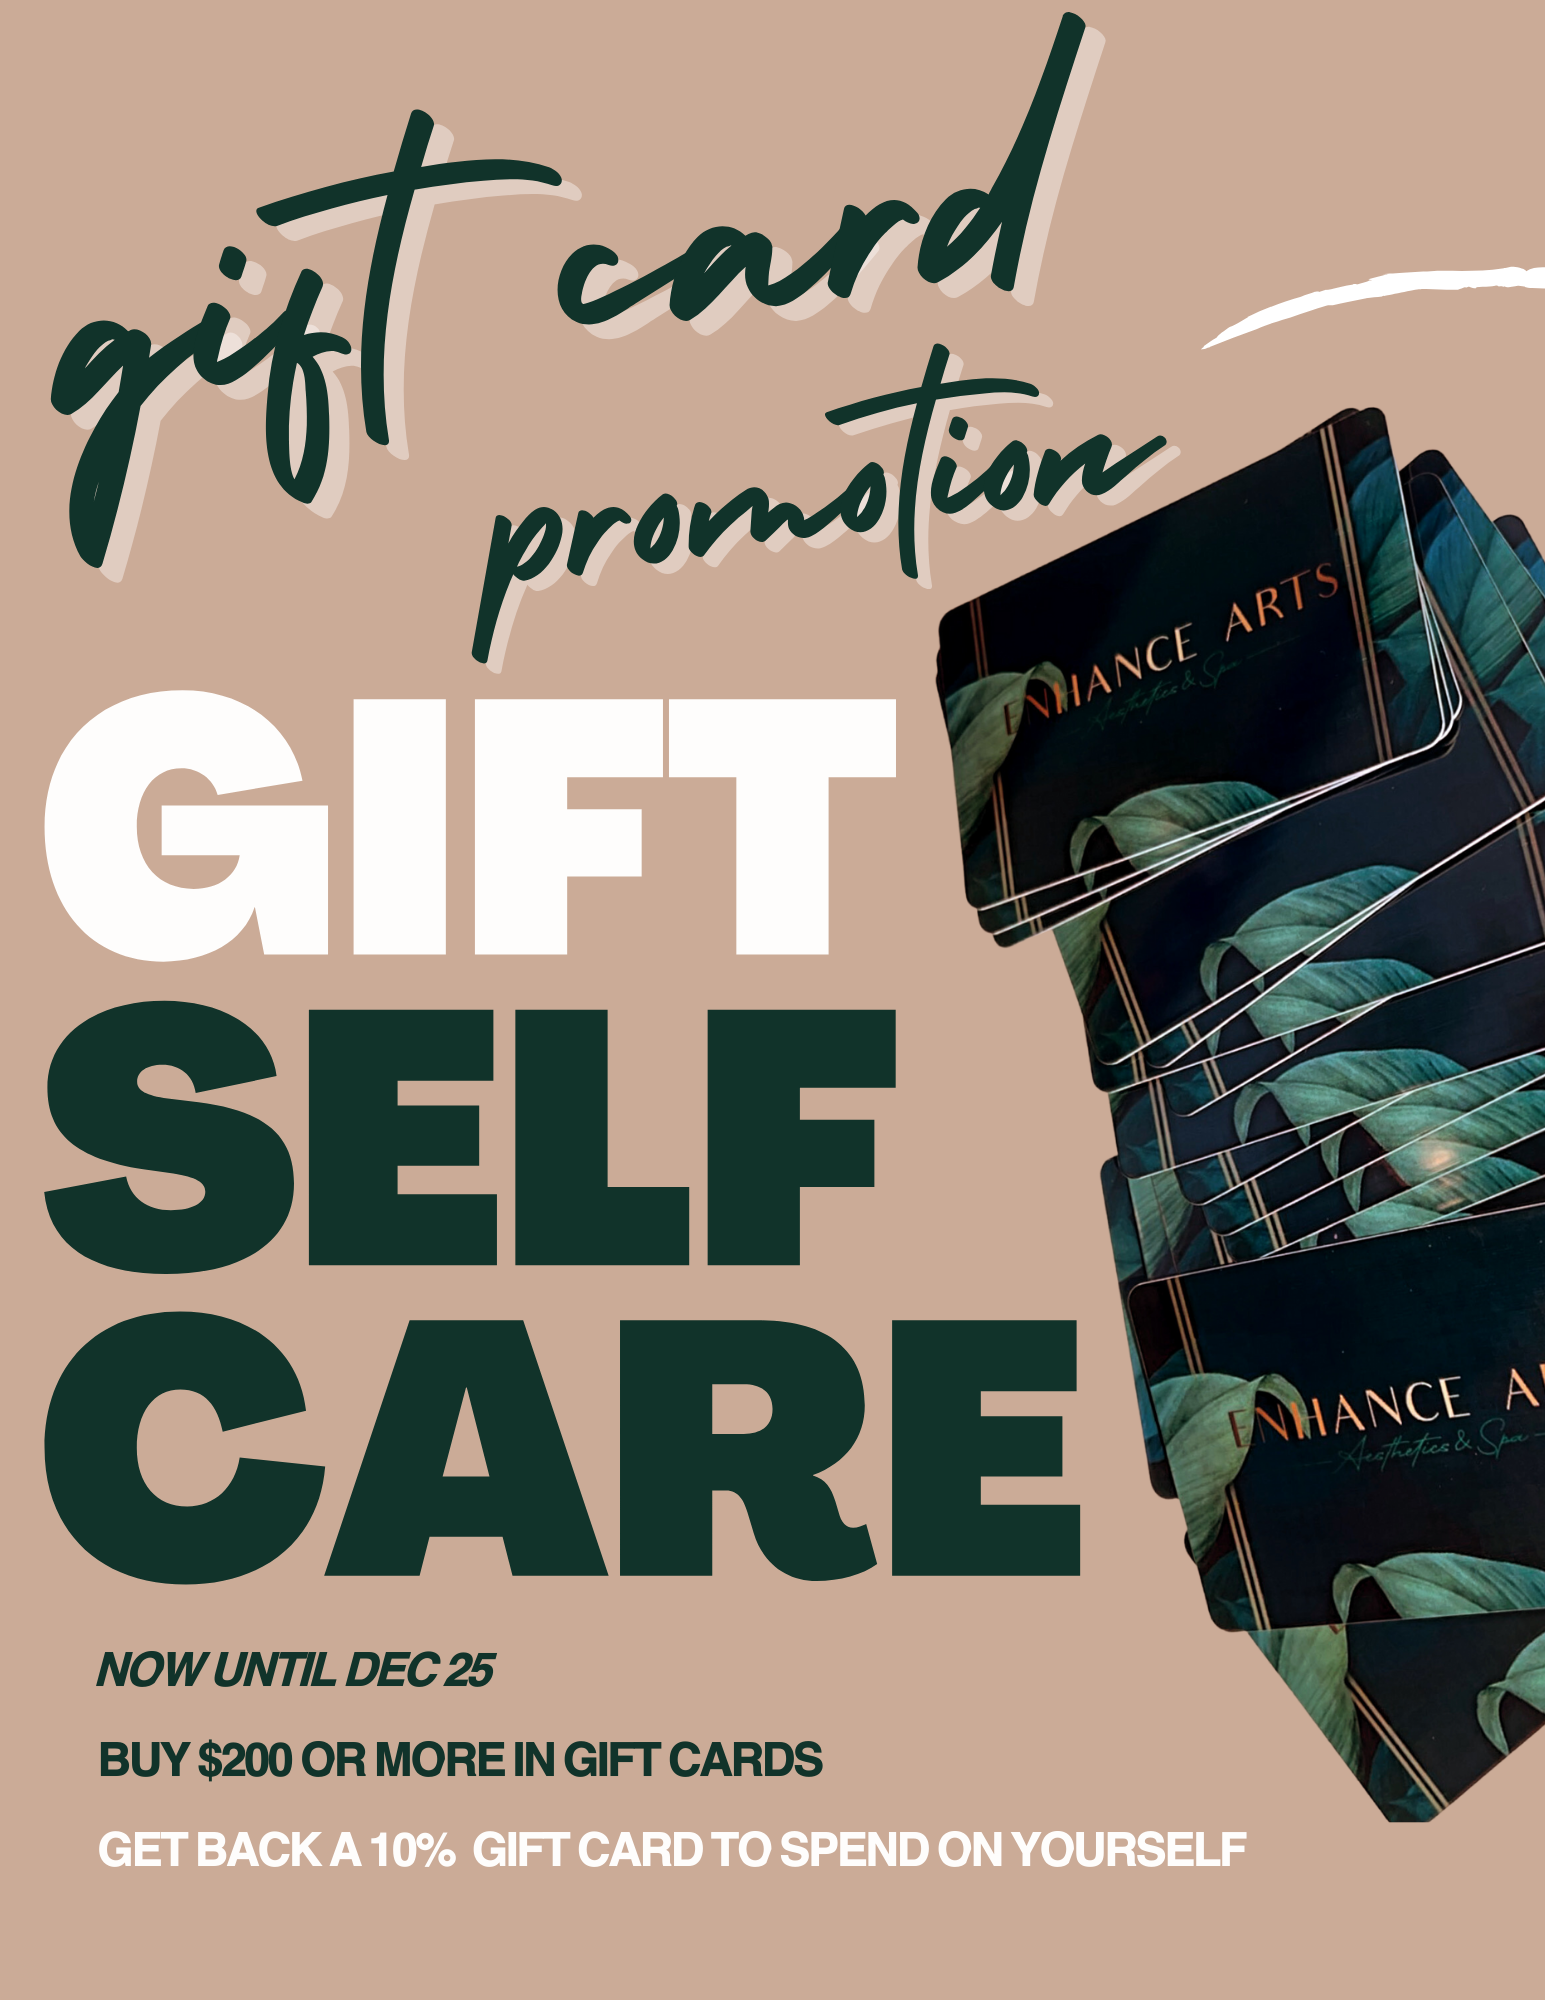 IN-STORE SERVICE GIFT CARD